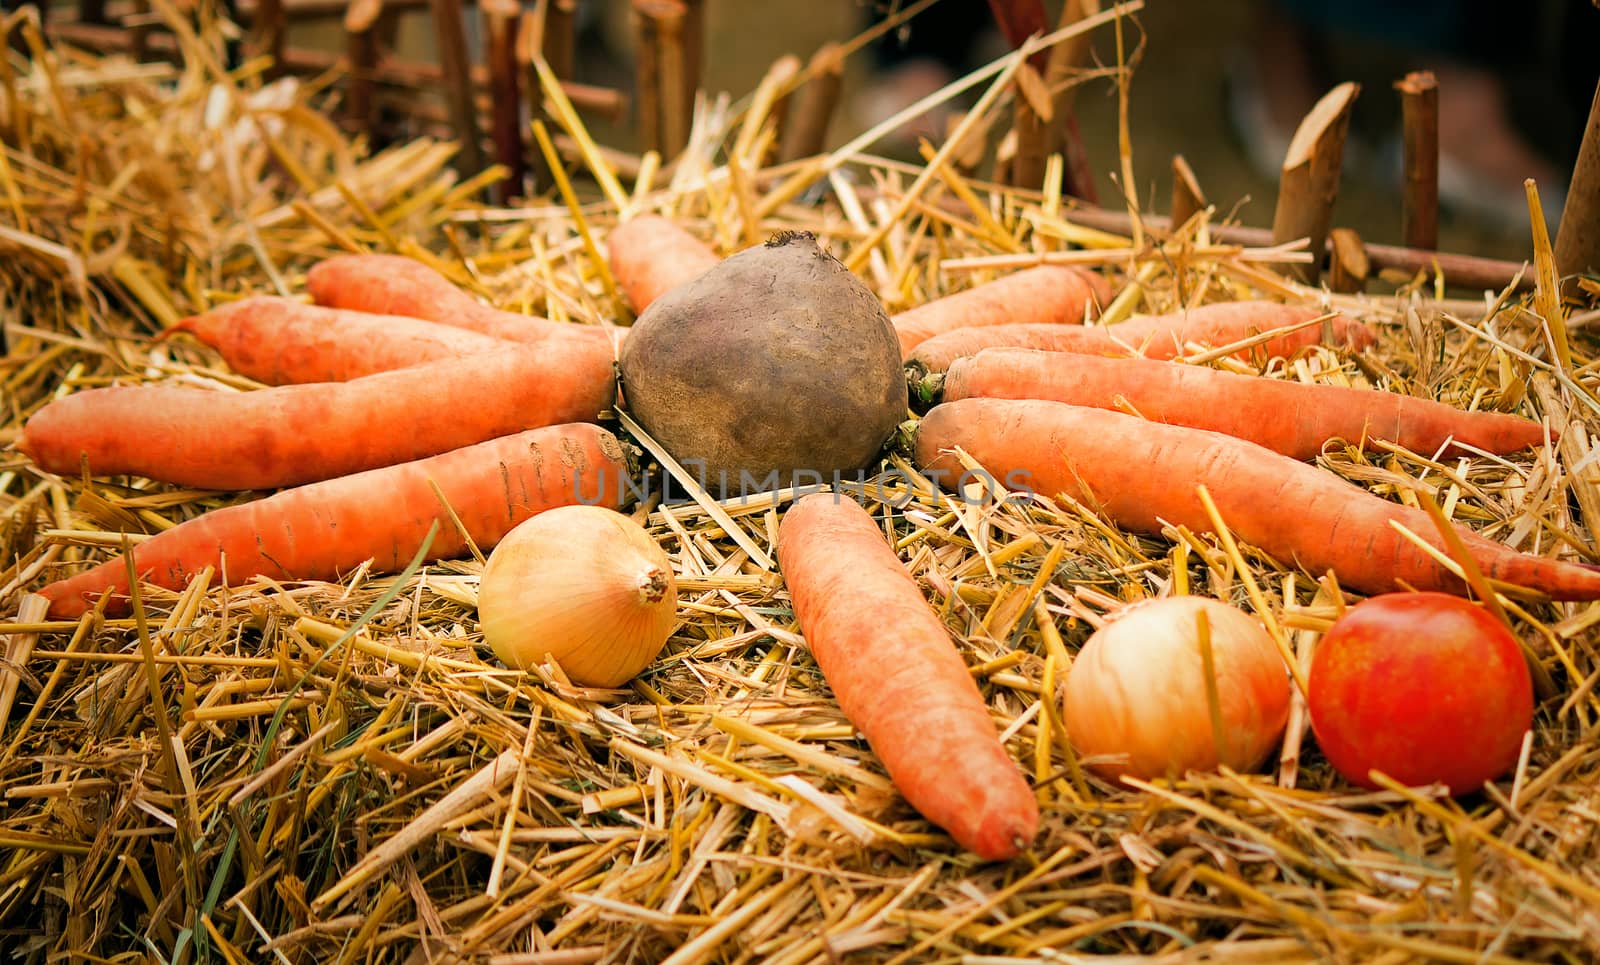 Carrots, beet, tomatoes, onions lie among straw. Are originally issued for goods advertizing.